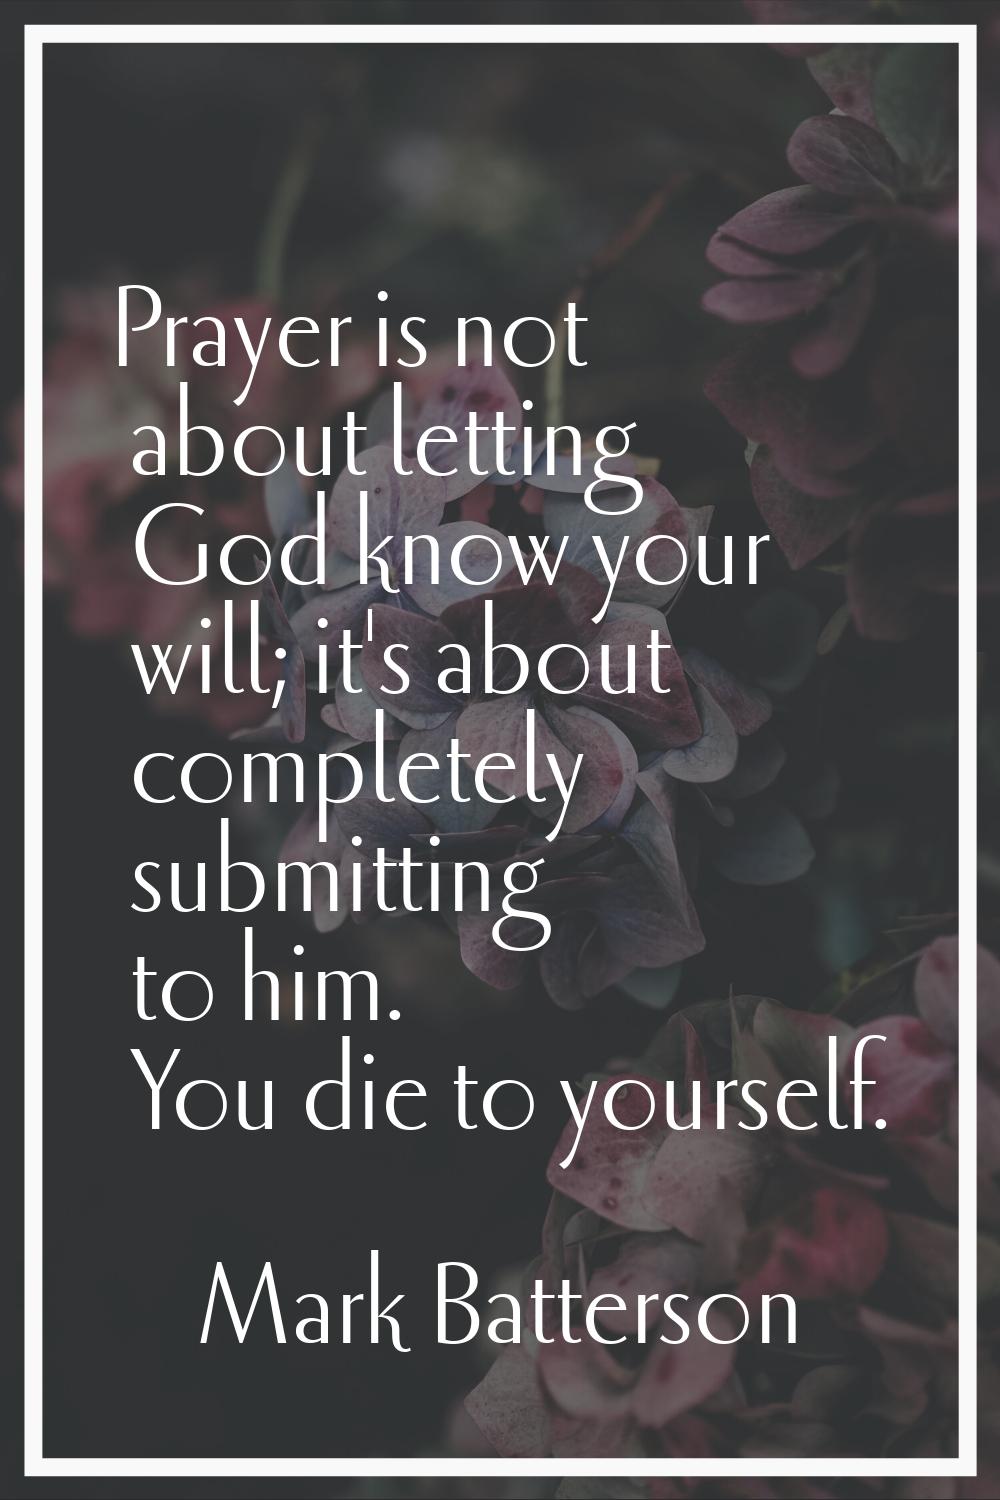 Prayer is not about letting God know your will; it's about completely submitting to him. You die to